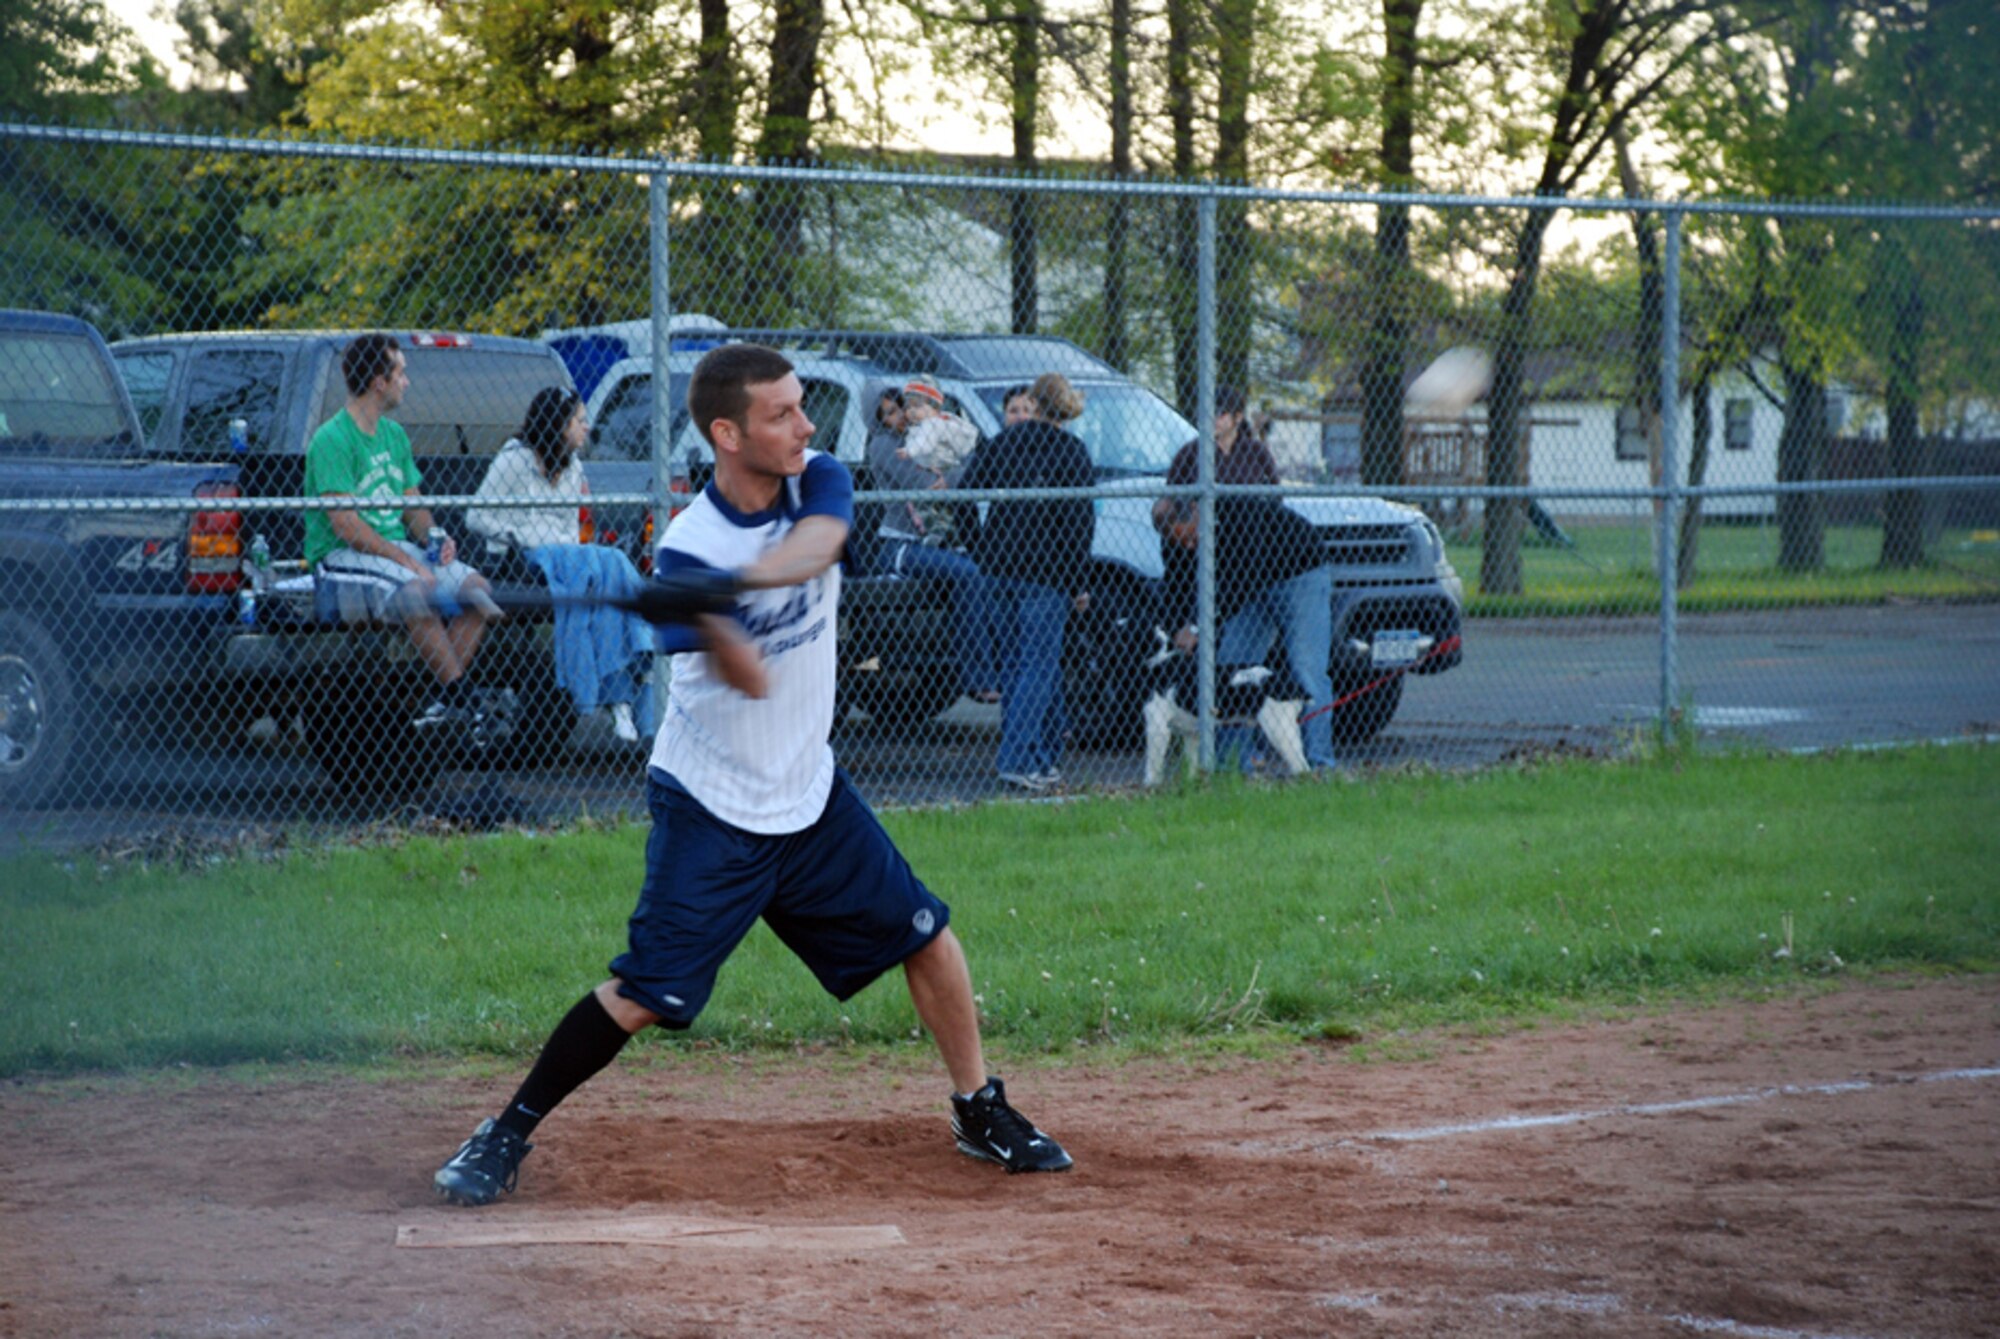 Members from the 914th Airlift Wing, the 107th AW and Military Entrance Processing Station (MEPS) here come together to play against local teams for some after work fun at a local park May 16.  In the photo, Carl Hall, a staff sergeant from the 914th security forces squadron, helps lead his team to victory in a close game. (U.S. Air Force photo/Tech. Sgt. Charity Edwards).